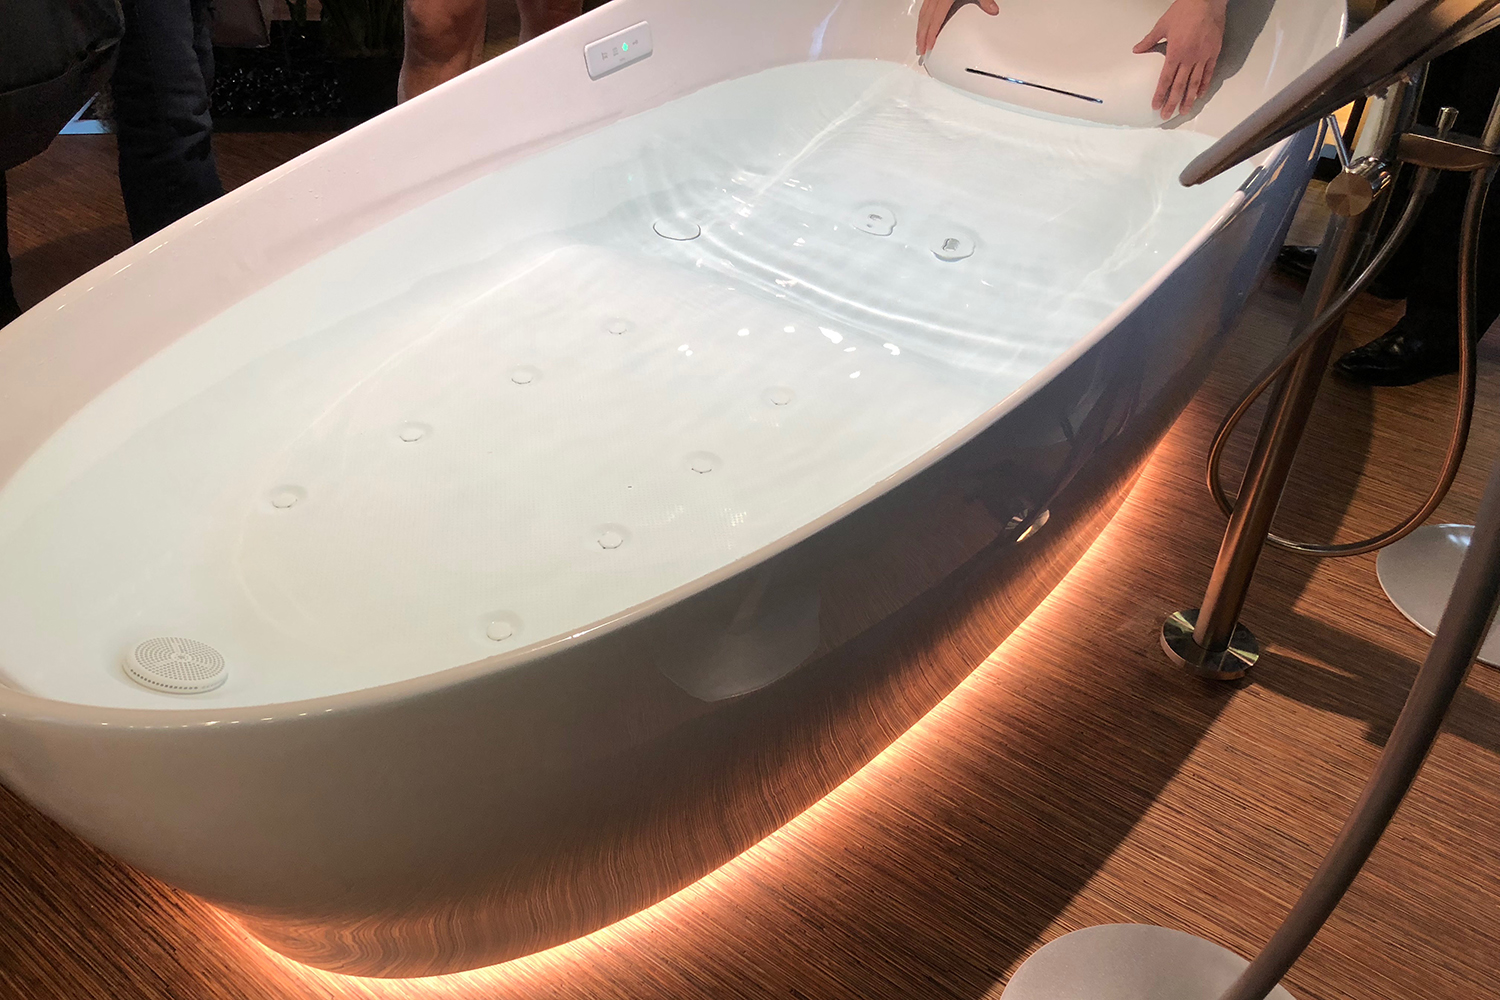 The Toto Flotation Tub Makes You Feel Like You're Floating in